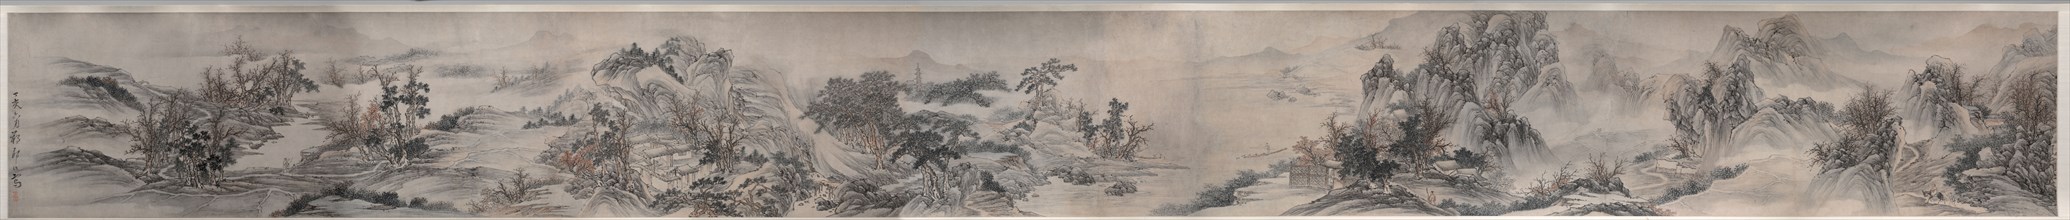 Autumn Mist in the Countryside, 1647. Zou Zhe (Chinese, c. 1610-before 1688). Handscroll, ink and